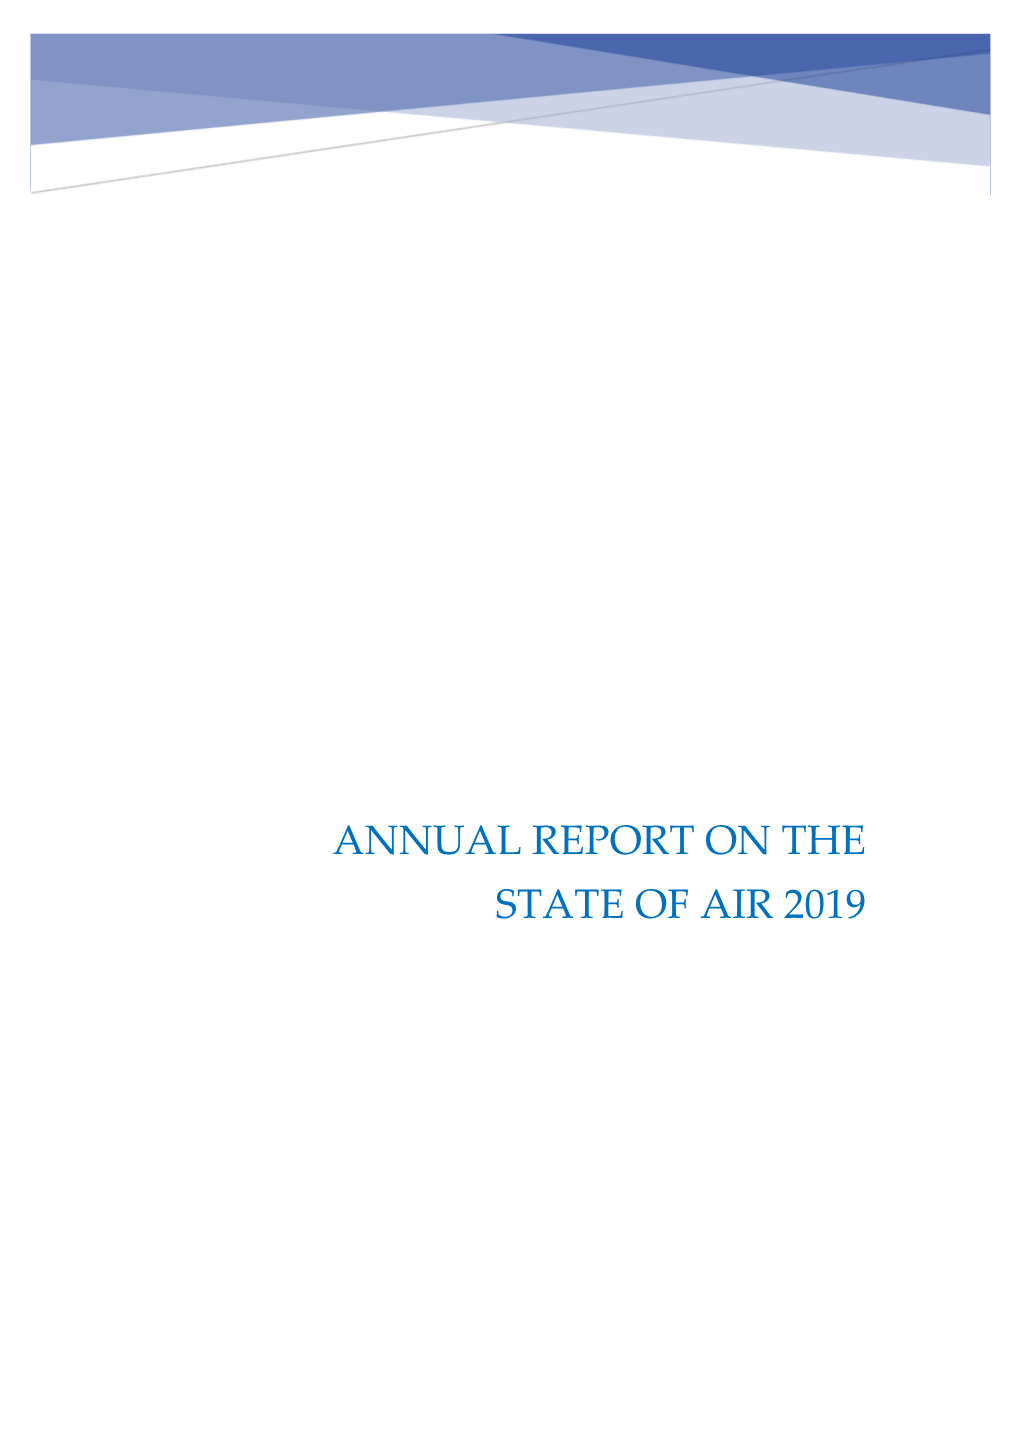 Annual Report on the State of Air 2019